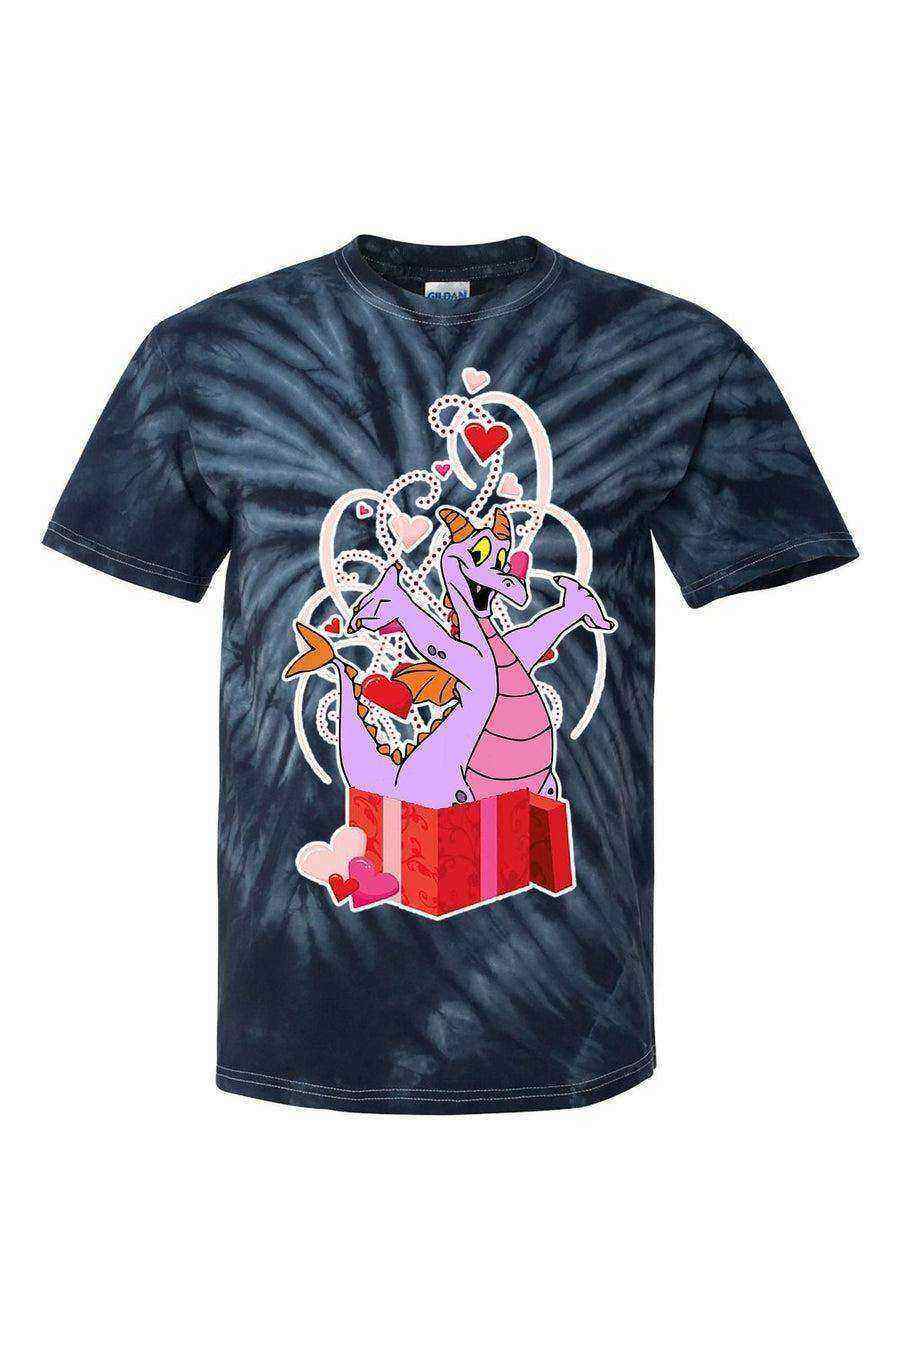 Figment Valentines Day Tie-Dye Shirt - Dylan's Tees